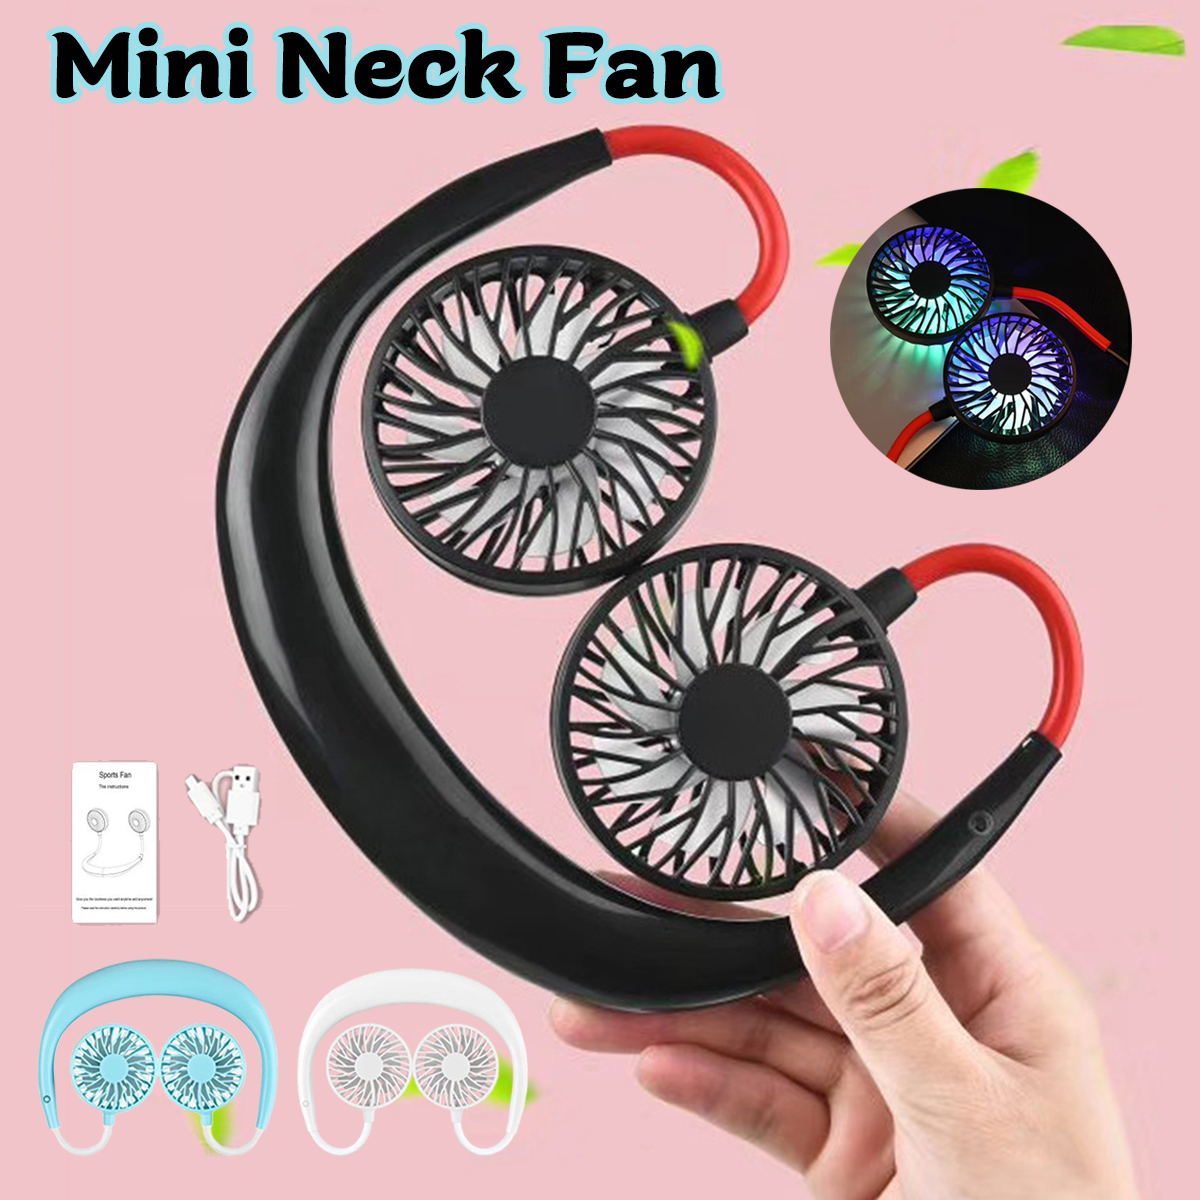 Portable-Neck-Hanging-Fan-USB-Rechargeable-Neckband-Sport-Lazy-Cooler-Double-Head-Cooling-1706696-1